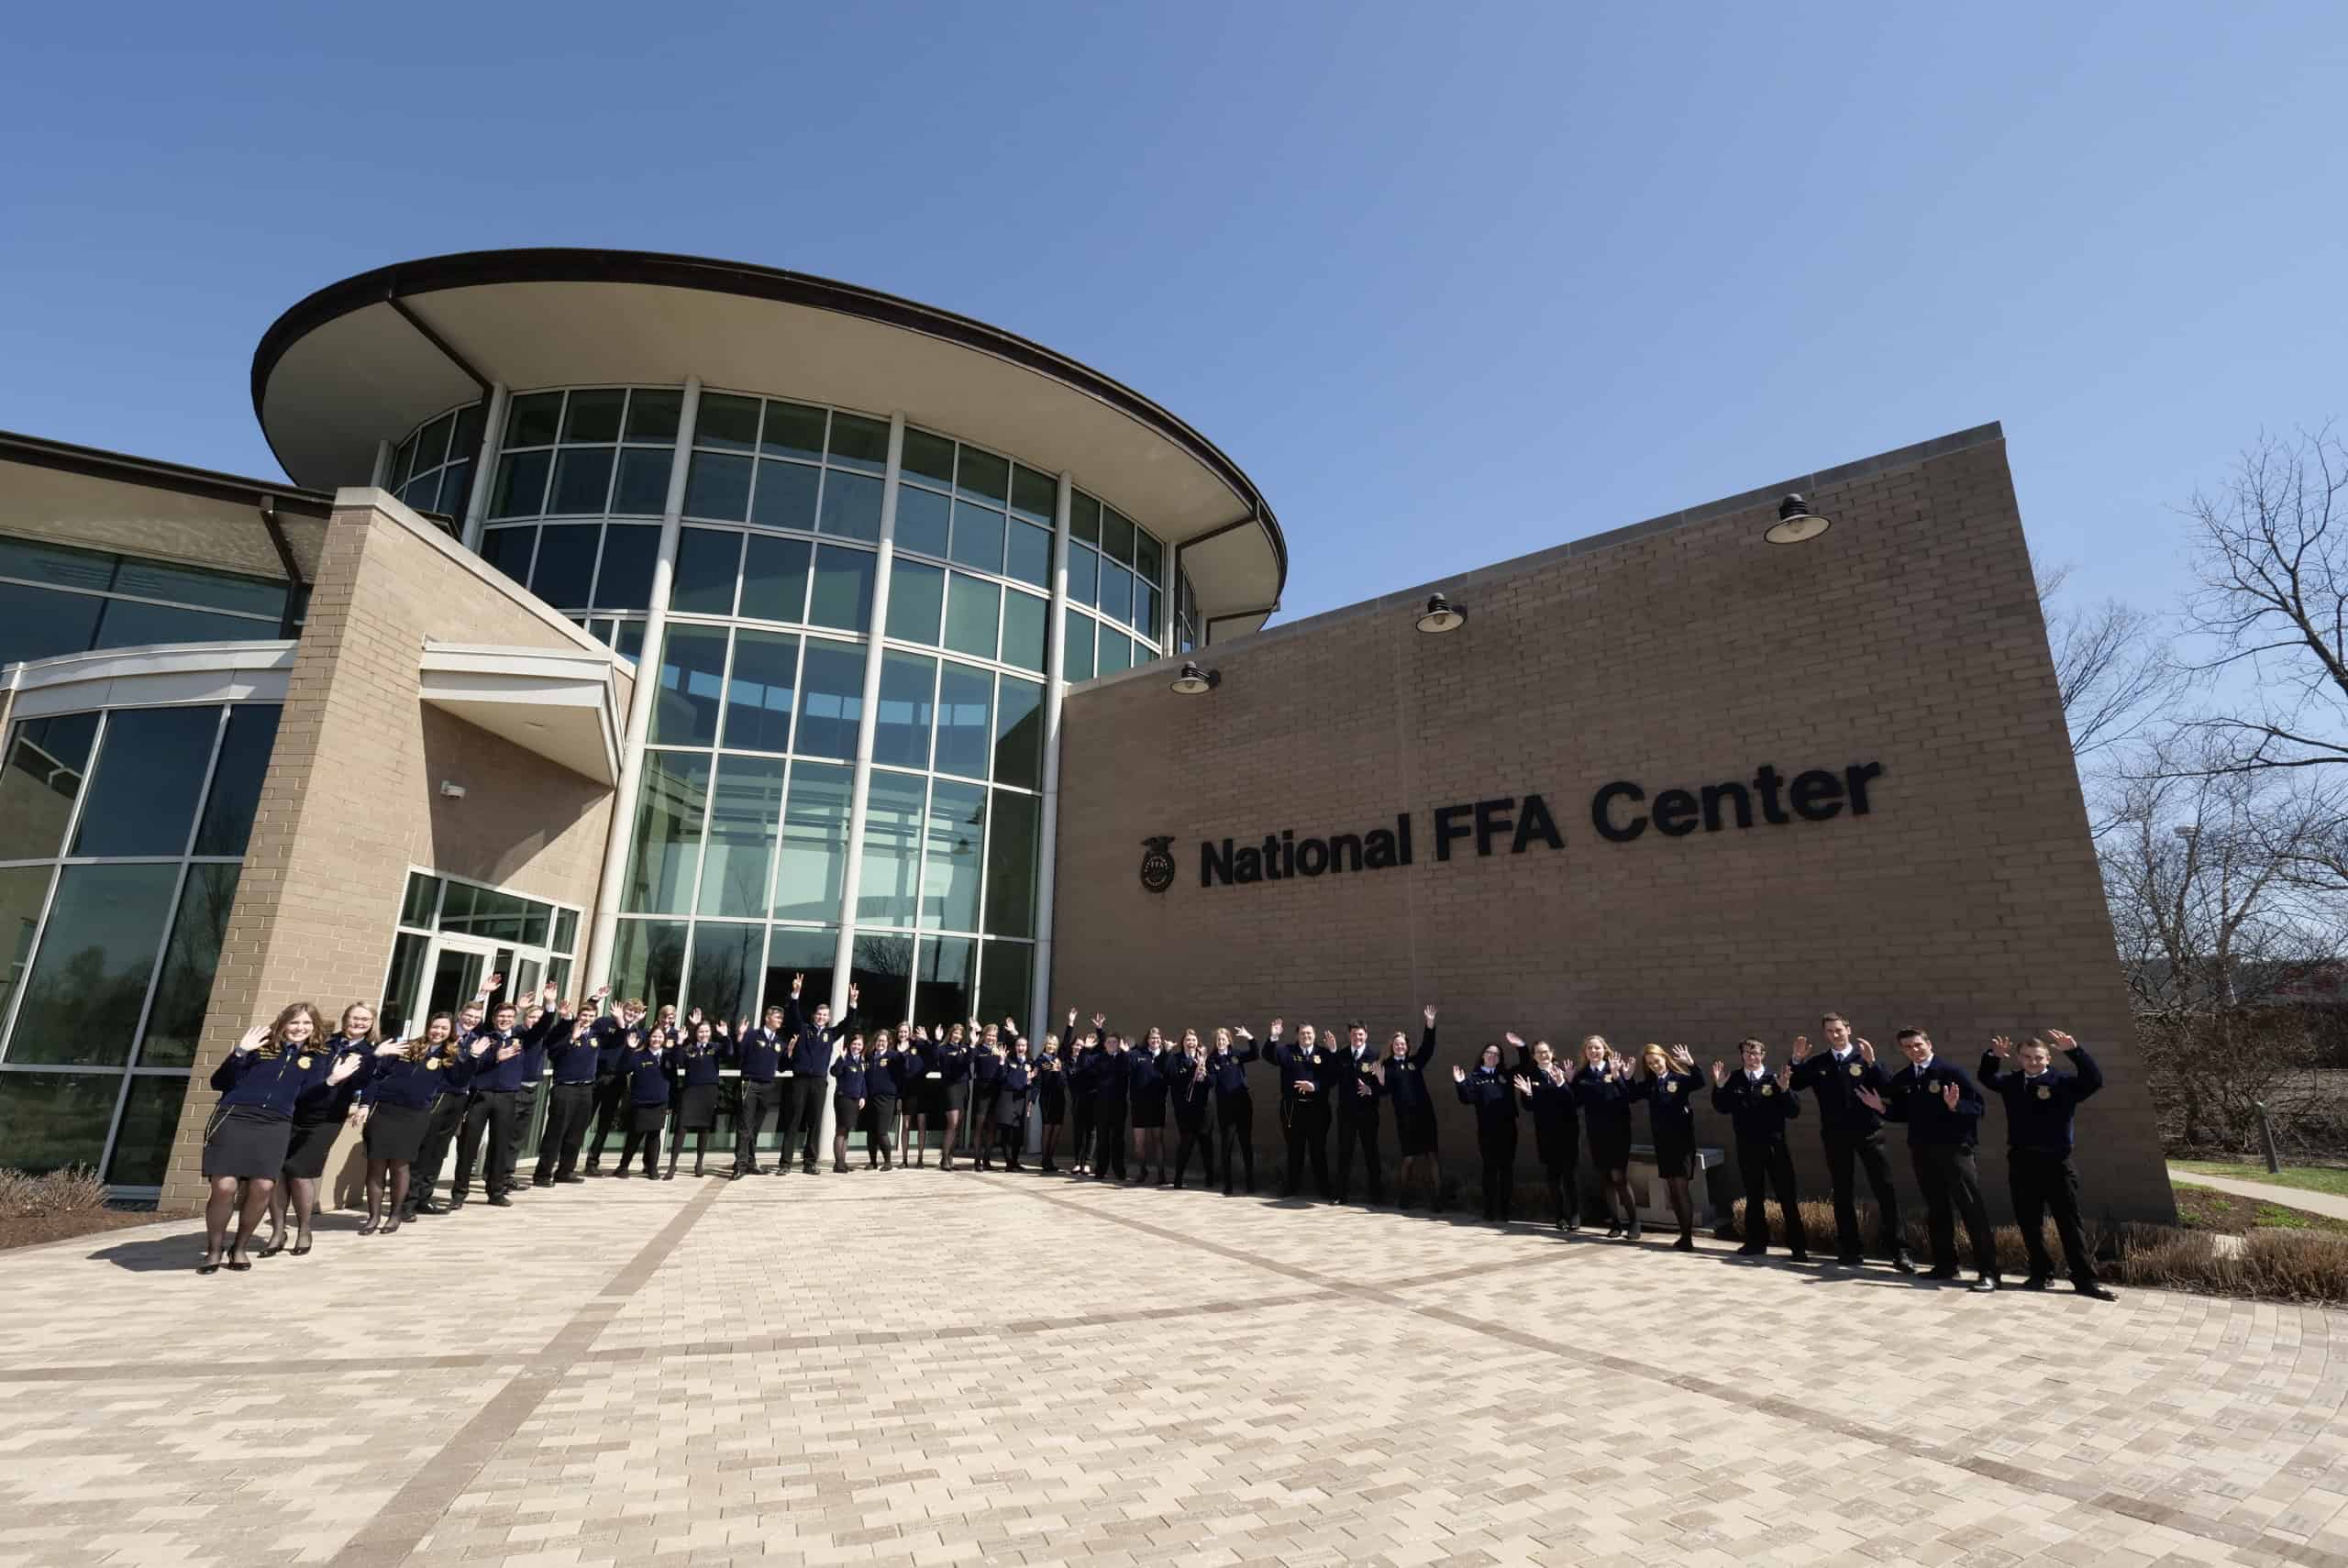 Now located at 6060 FFA Drive in Indianapolis, Ind., the National FFA Center serves as a meeting point for the past, present and future of our organization.